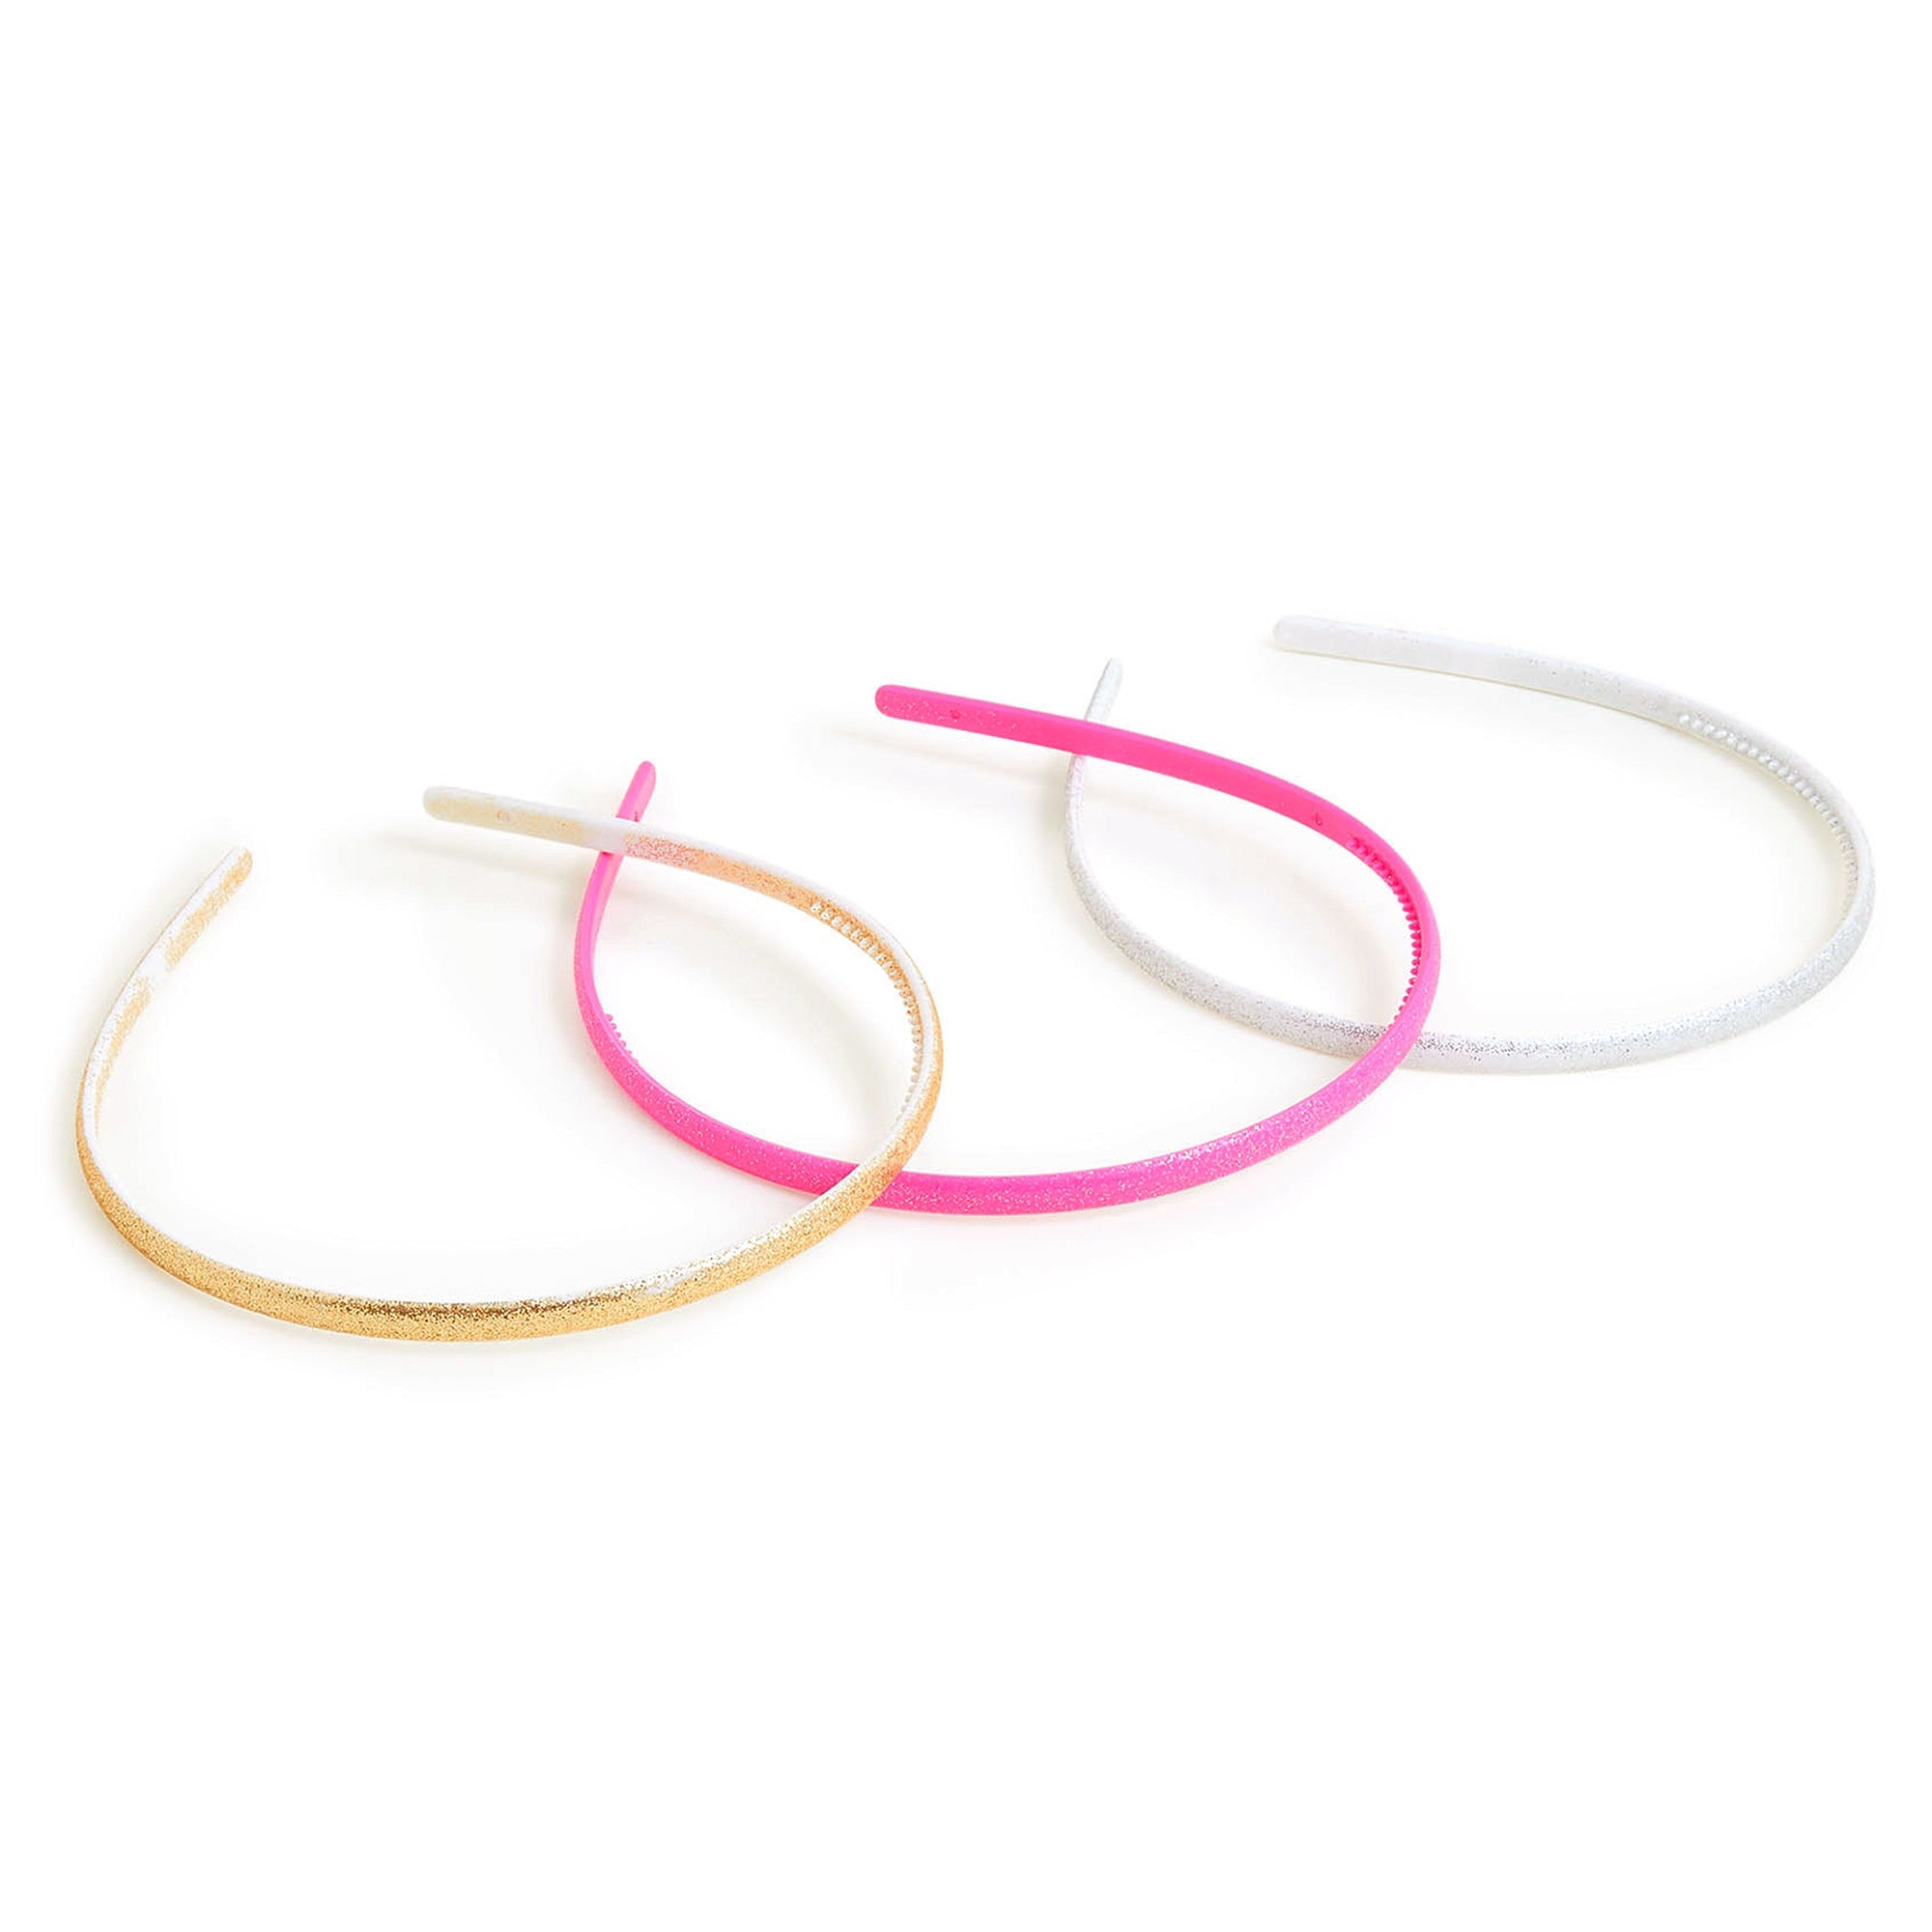 Accessorize London Girl's Set Of 3 Rec Skinny Alice Hair Bands